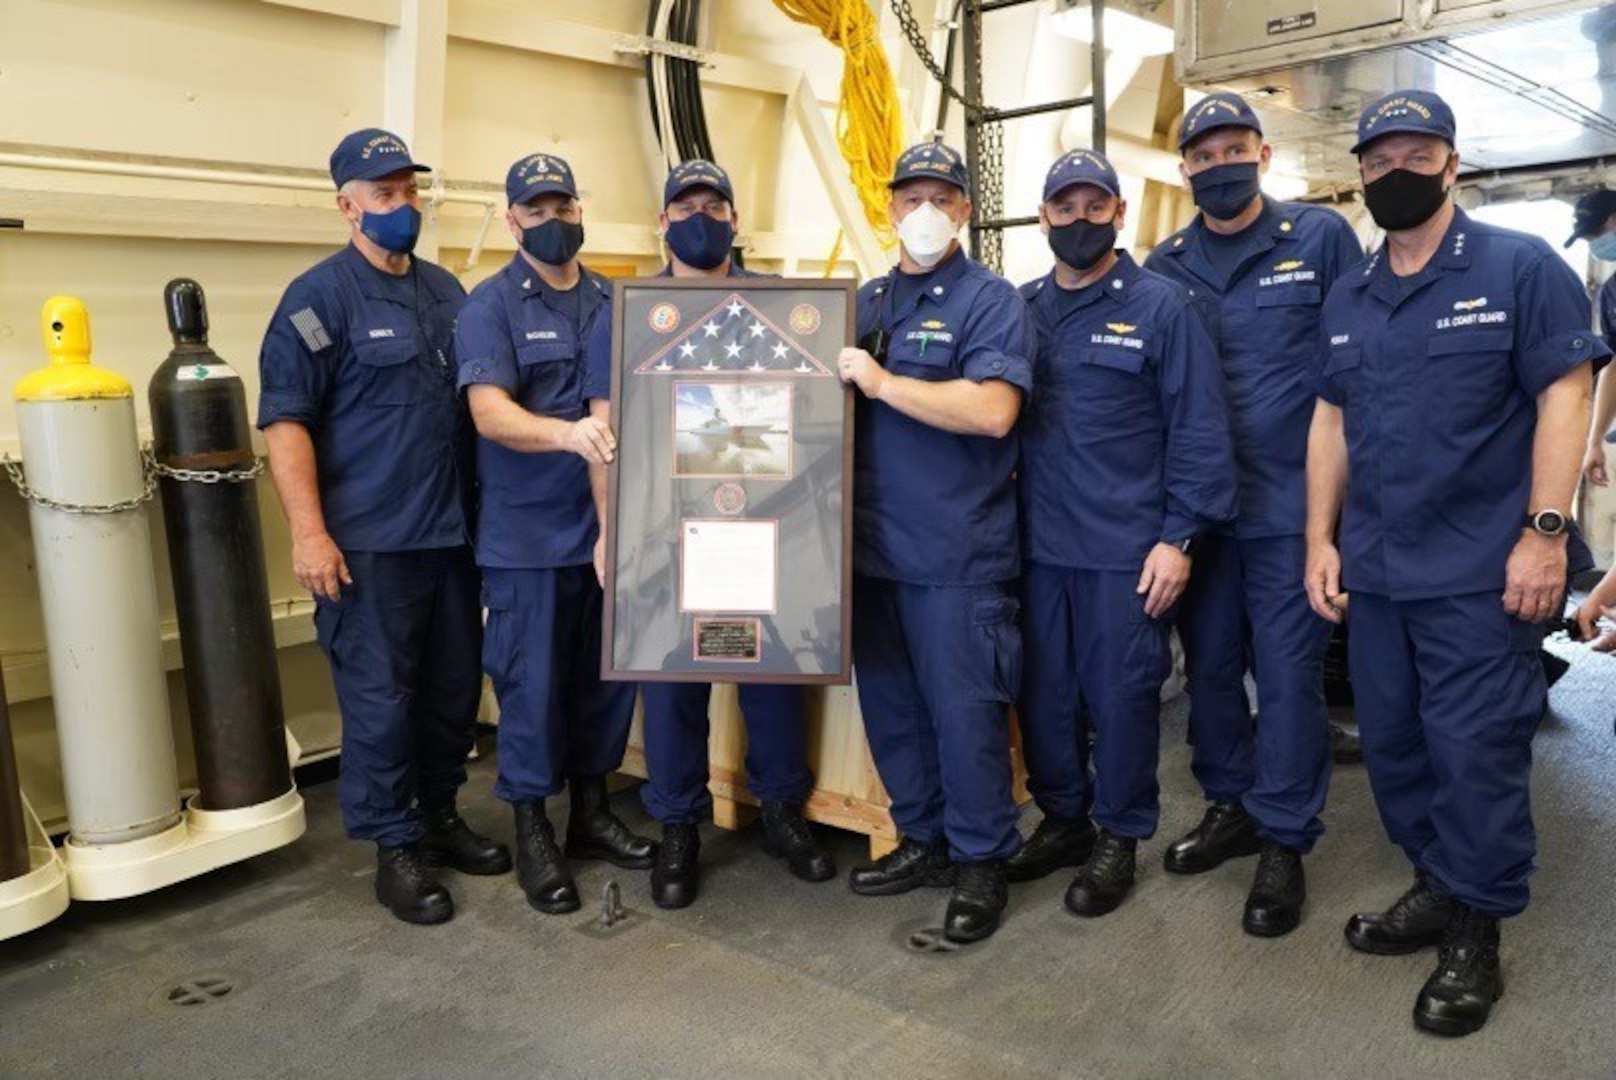 Coast Guard Cutter James wins the Excellence in Safety Award: The Coast Guard Commandant, Adm. Karl Schultz, presented the crew of the Coast Guard Cutter James, a National Security Cutter, the Excellence in Safety Award March 18, 2021. The crew of the James was honored for its quick and innovative thinking during a counter-drug patrol. During the 74 days underway, the crew devised and implemented extensive operational and personal protective procedures to keep everyone free from infection and maintain its full mission effectiveness, despite interdicting three detainees that tested positive for COVID-19. Bravo Zulu to the crew of Cutter James!